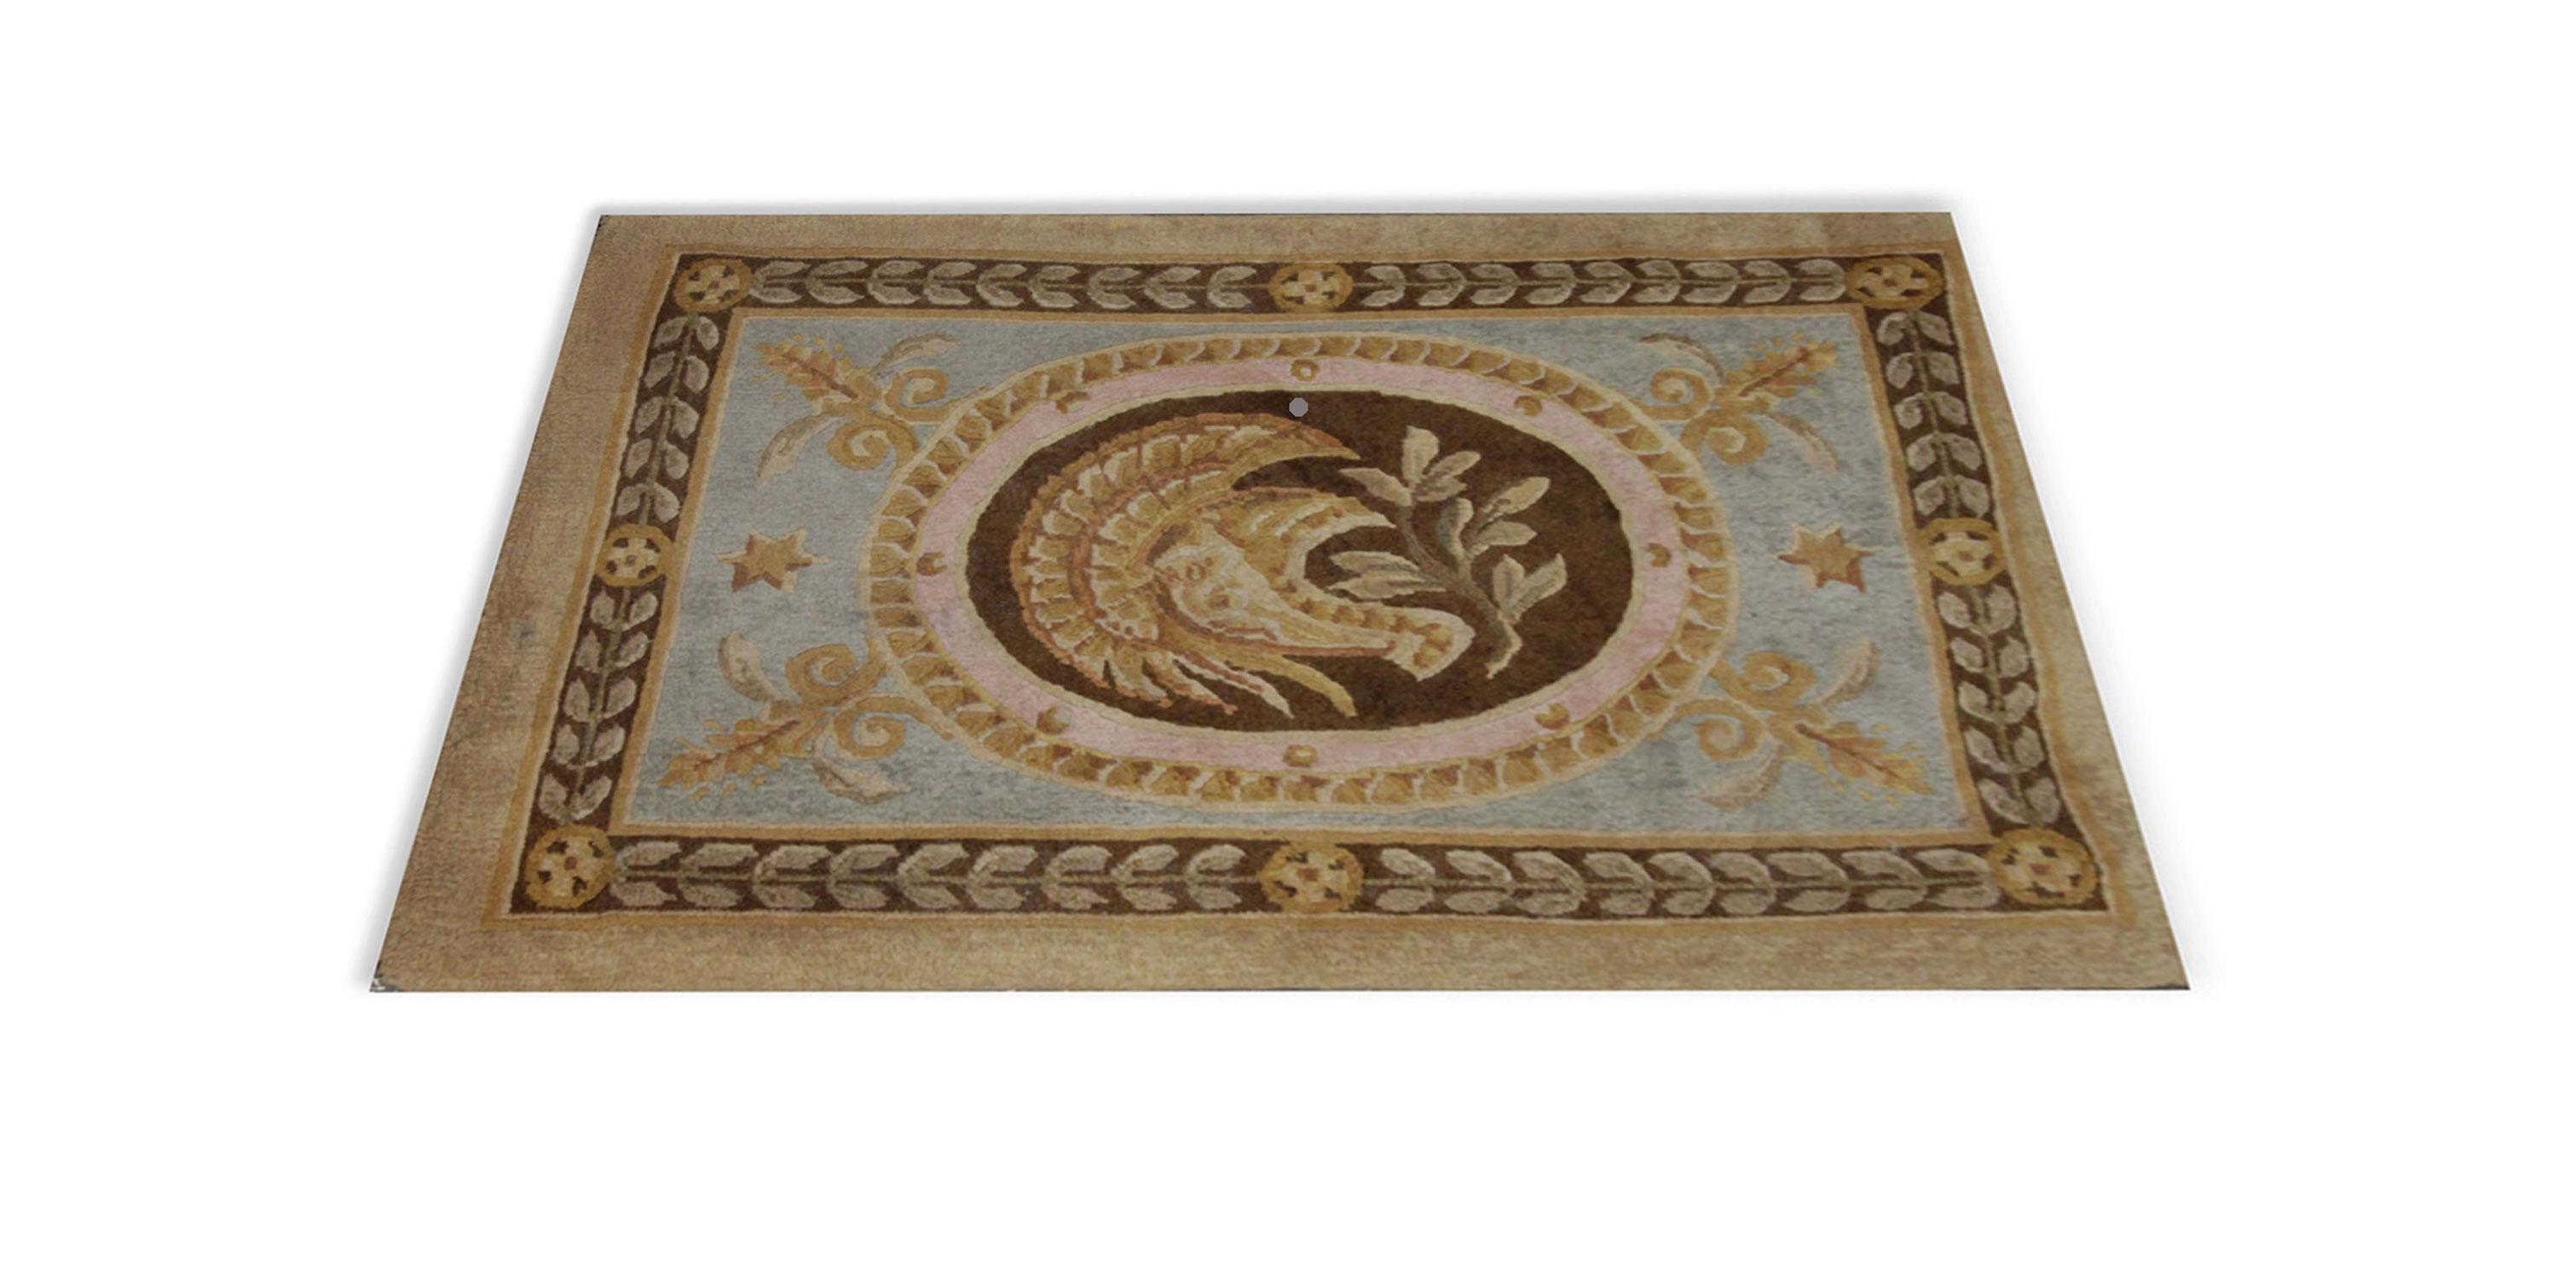 This handmade carpet French-style handwoven rug makes a wonderful housewarming gift, wedding gift or Christmas gift. The Savonnerie rug is one of the most prestigious European knotted pile rugs constructed with wool and cotton. The originality of